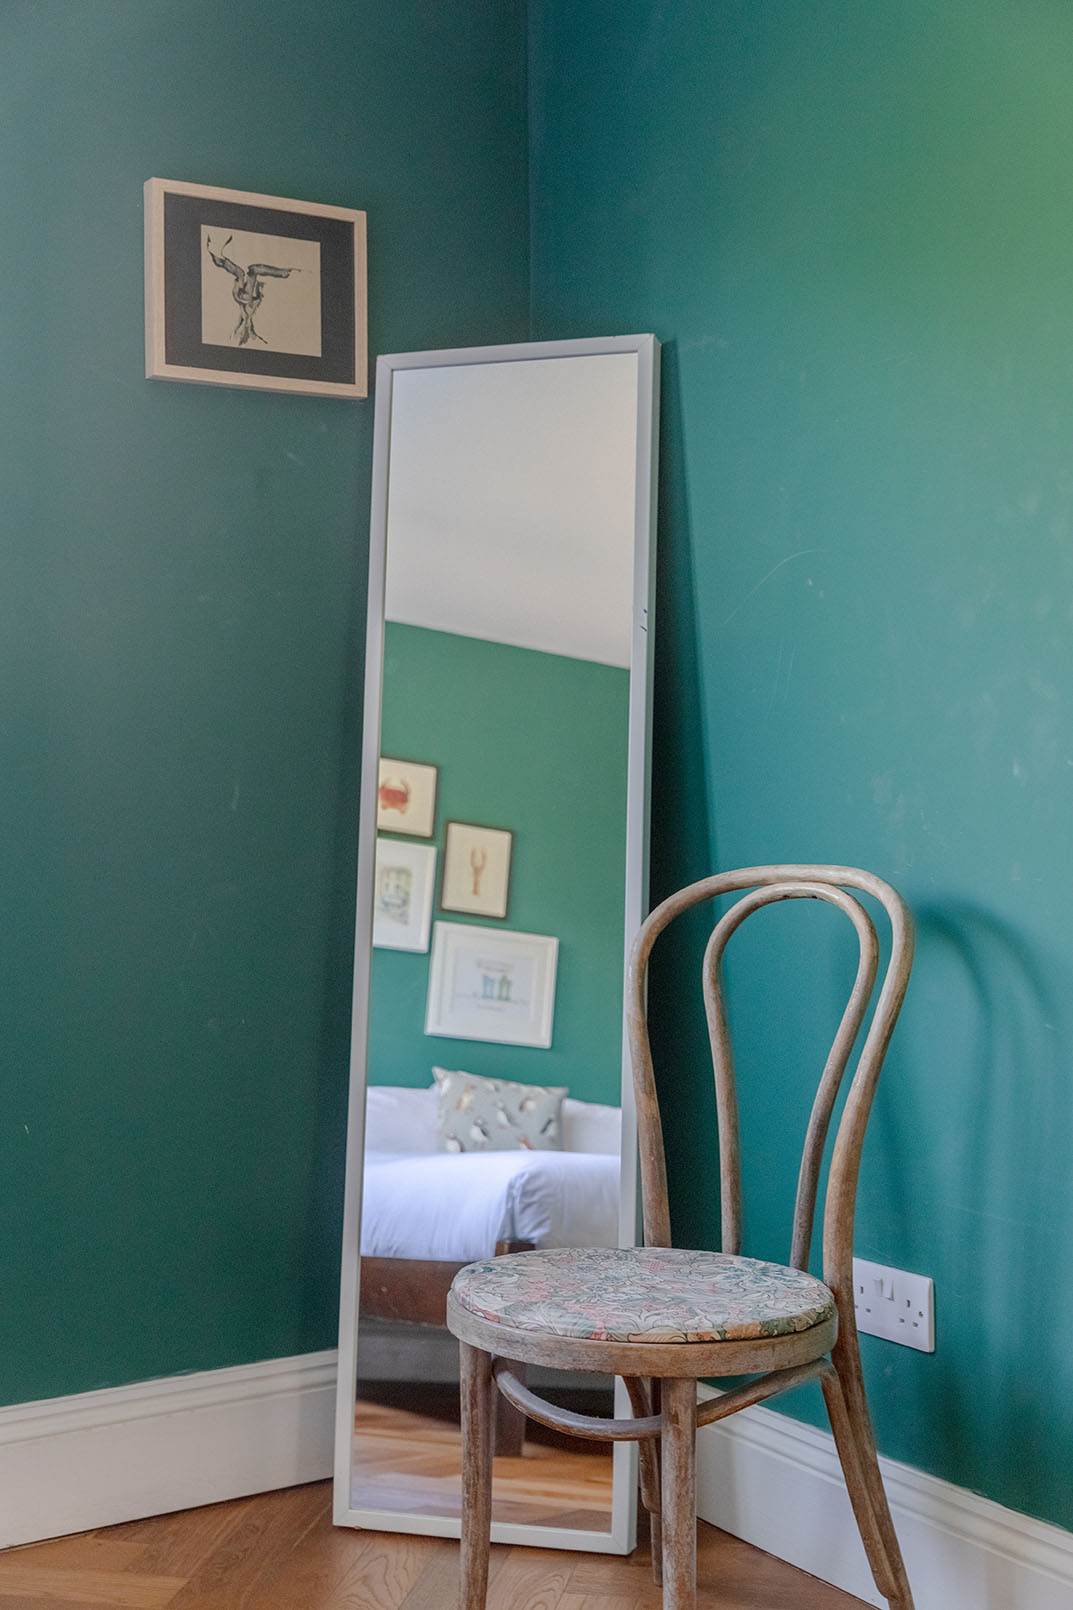 Corner of a bedroom with dark green walls, a full length mirror, an old wooden chair and the partial reflection of the bed with white sheets, captured for property photography as a detail for an airbnb listing